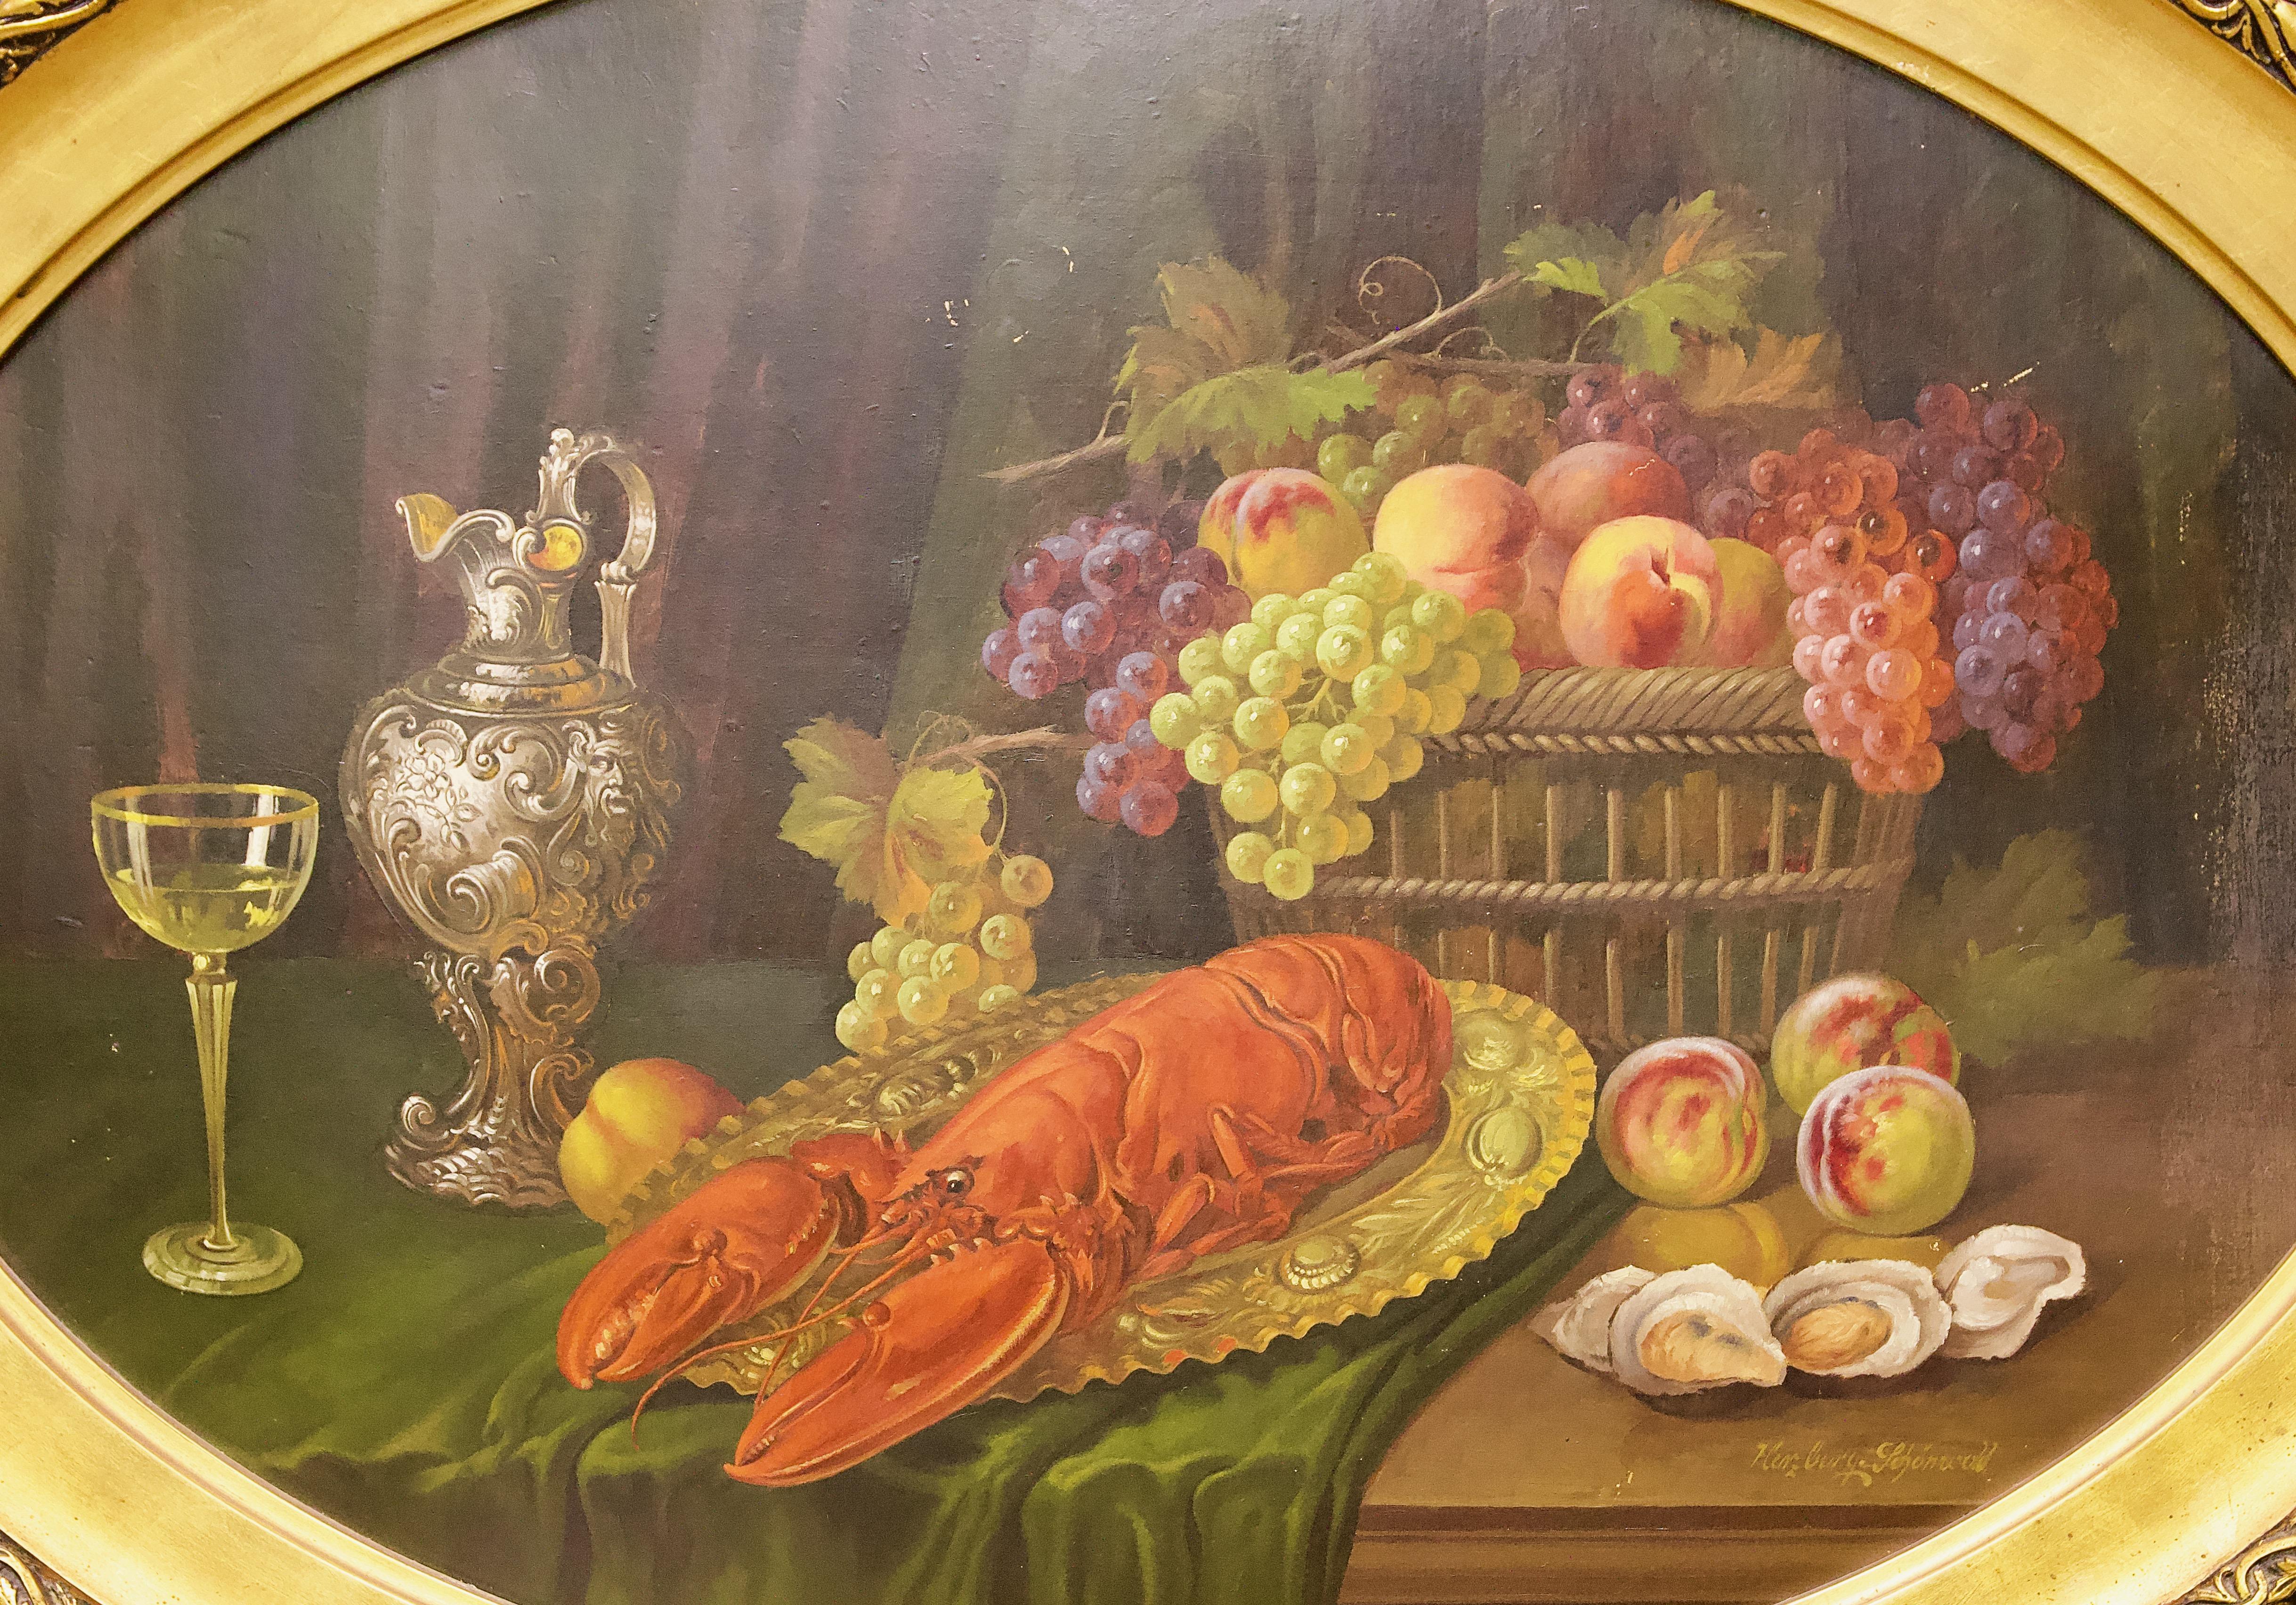 Oval Still Life, with Fruits and Lobster. Oil Painting by Herzberg-Schönwald.